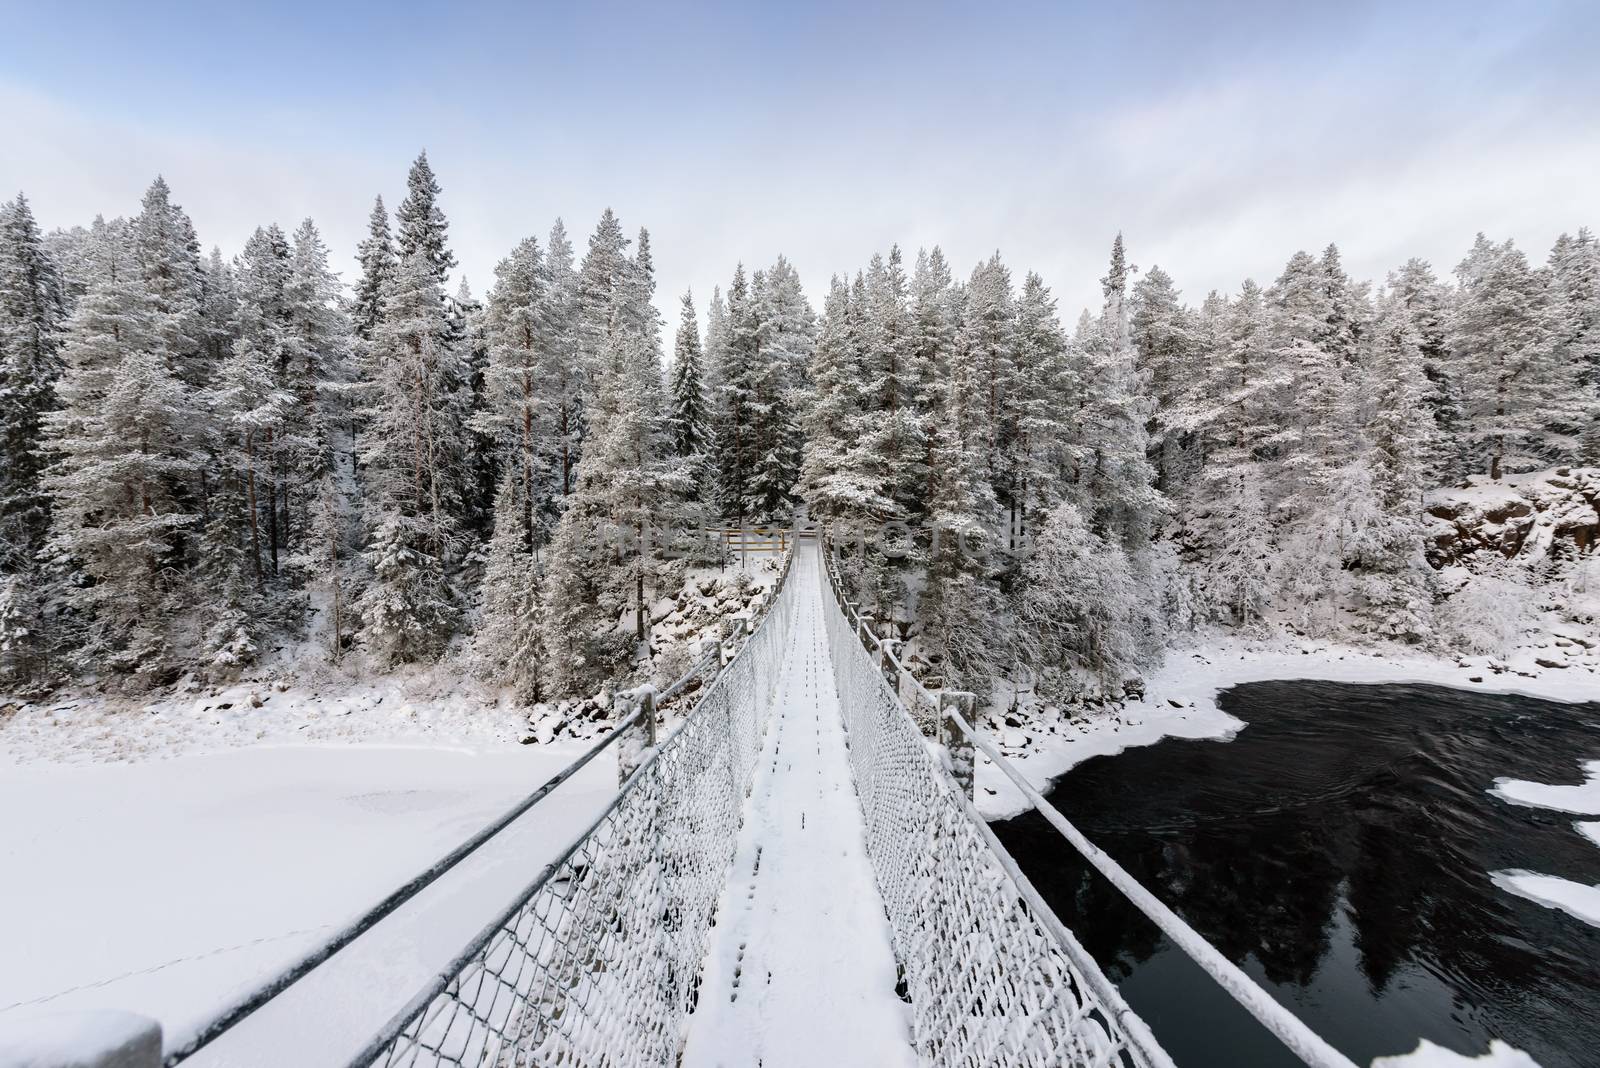 The bridge has covered with heavy snow and sky in winter season at Oulanka National Park, Finland.